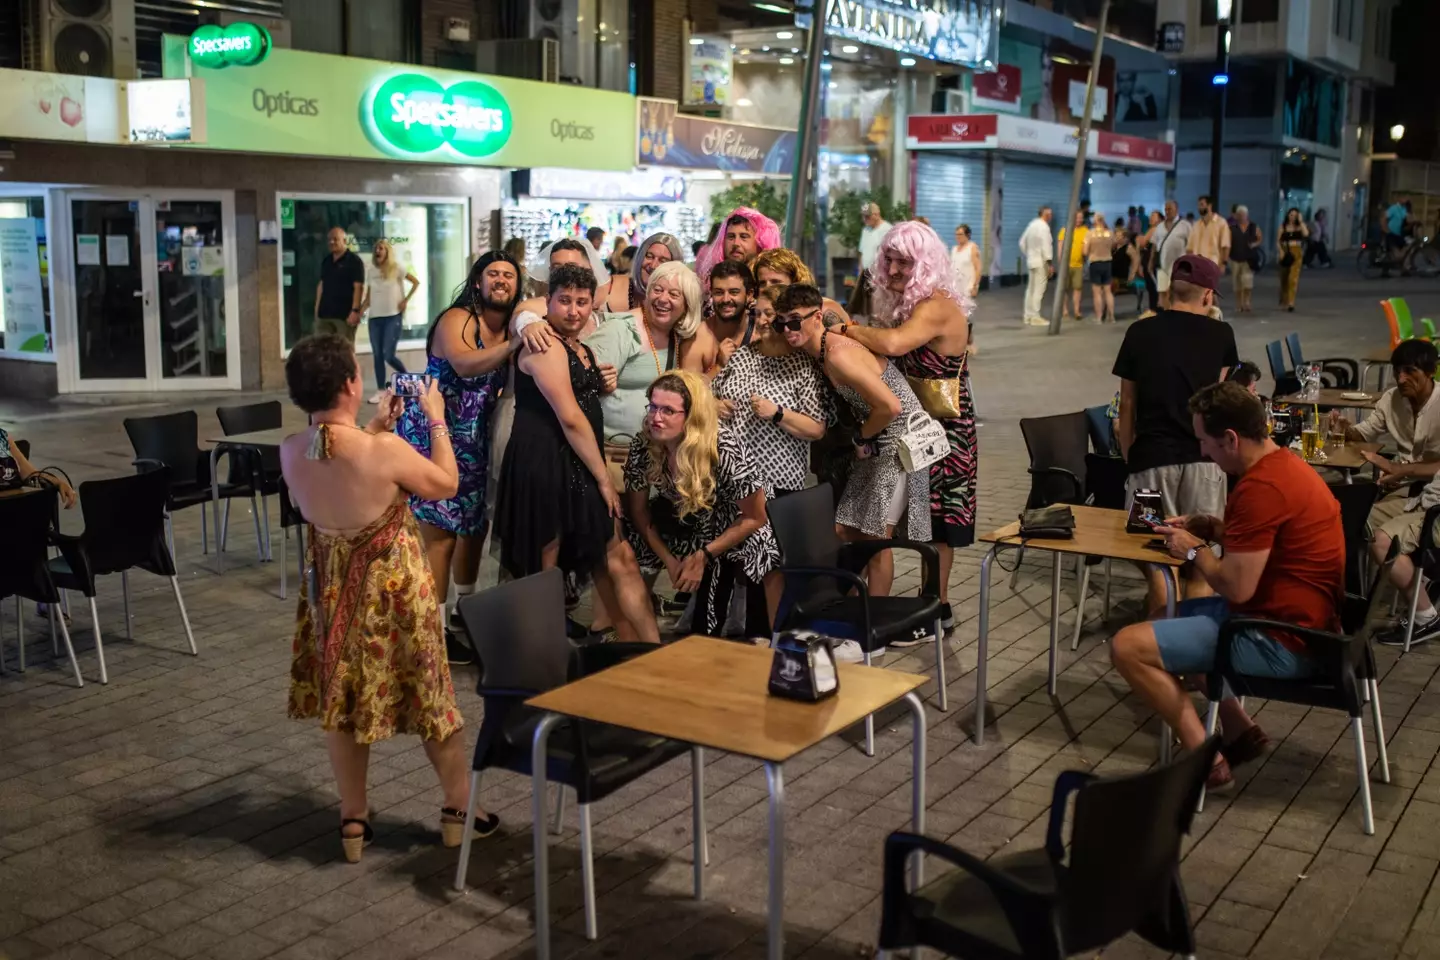 A Benidorm stag do in all its glory (Zowy Voeten/Getty Images)